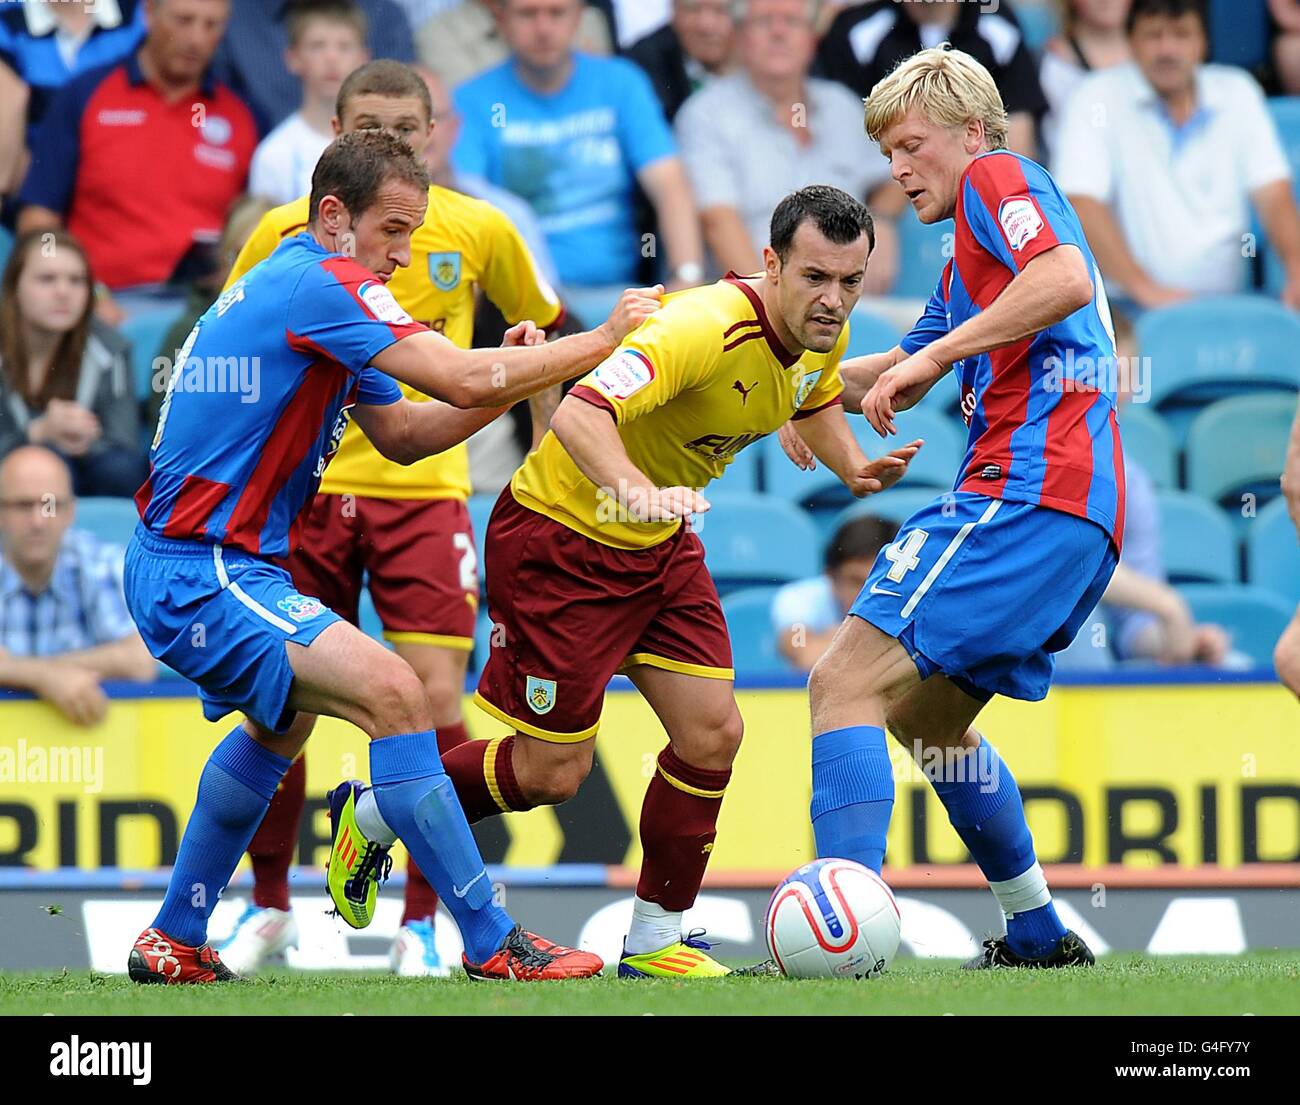 Soccer - npower Football League Championship - Crystal Palace v Burnley - Selhurst Park. Burnley's Ross Wallace gets between Crystal Palace's Jonathan Parr (right) and David Wright (left) Stock Photo